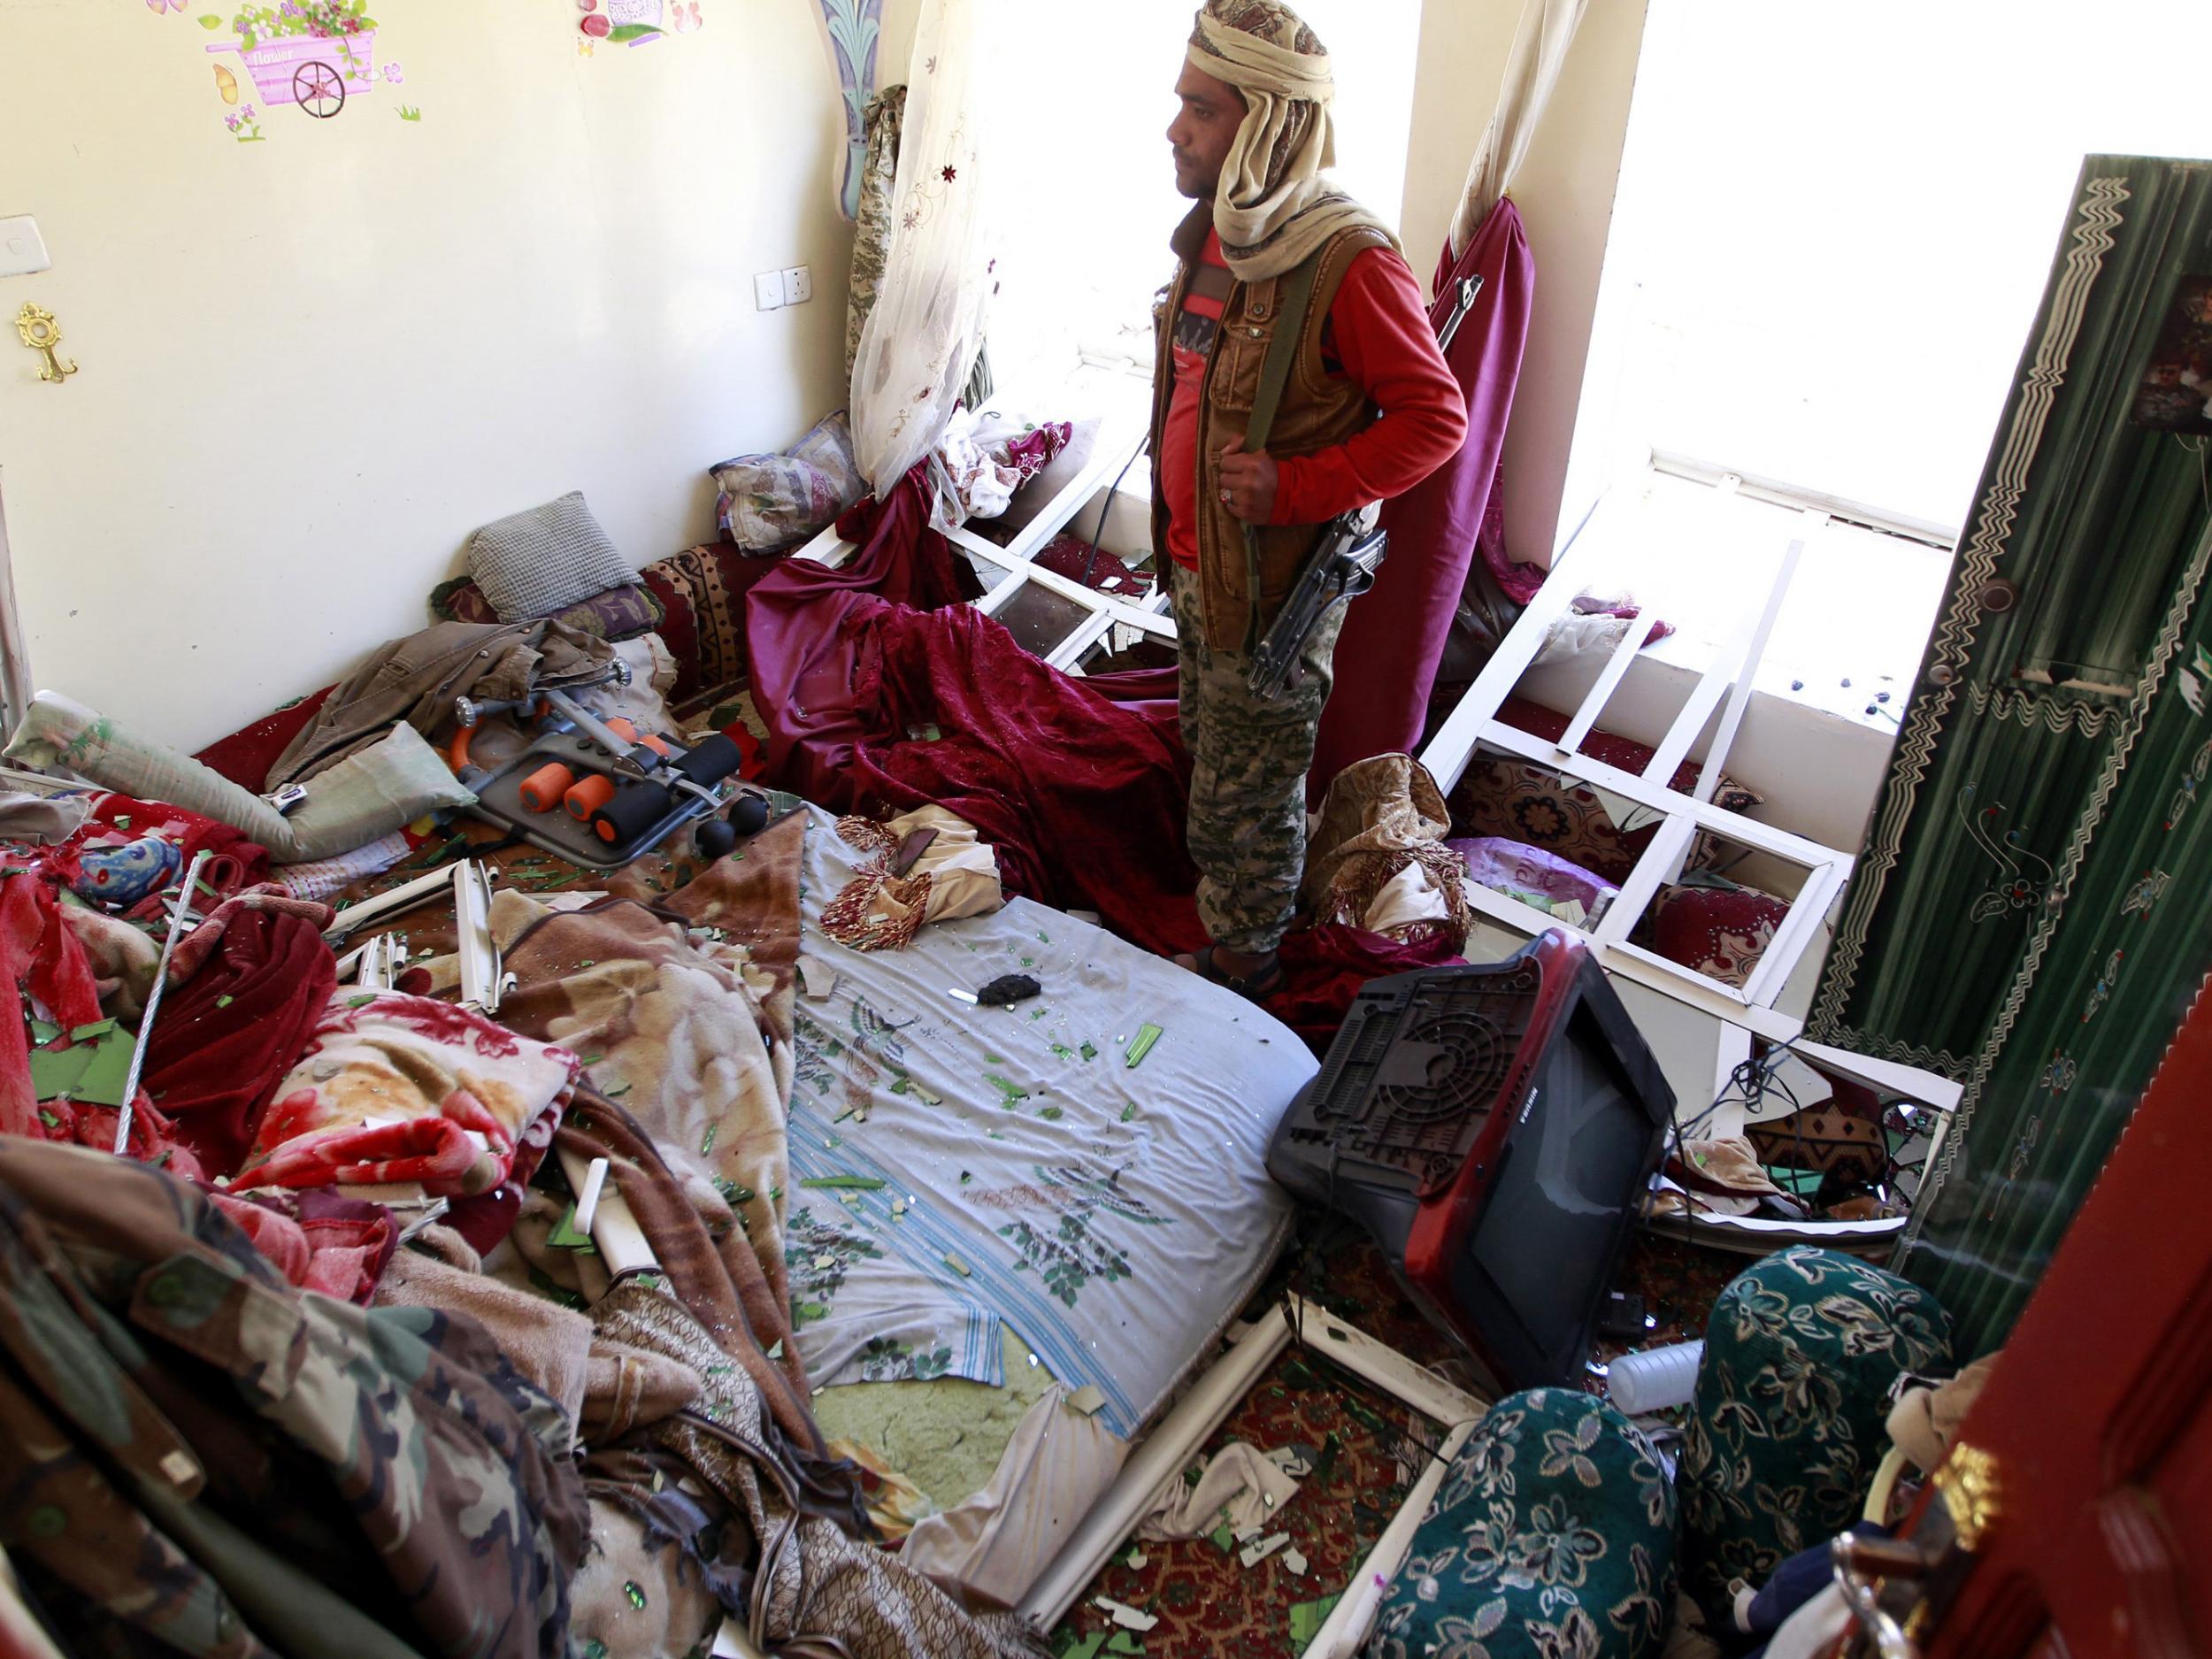 A Yemeni man inspects the damage in his house following air strikes carried out by the Saudi-led coalition in the capital Sanaa.